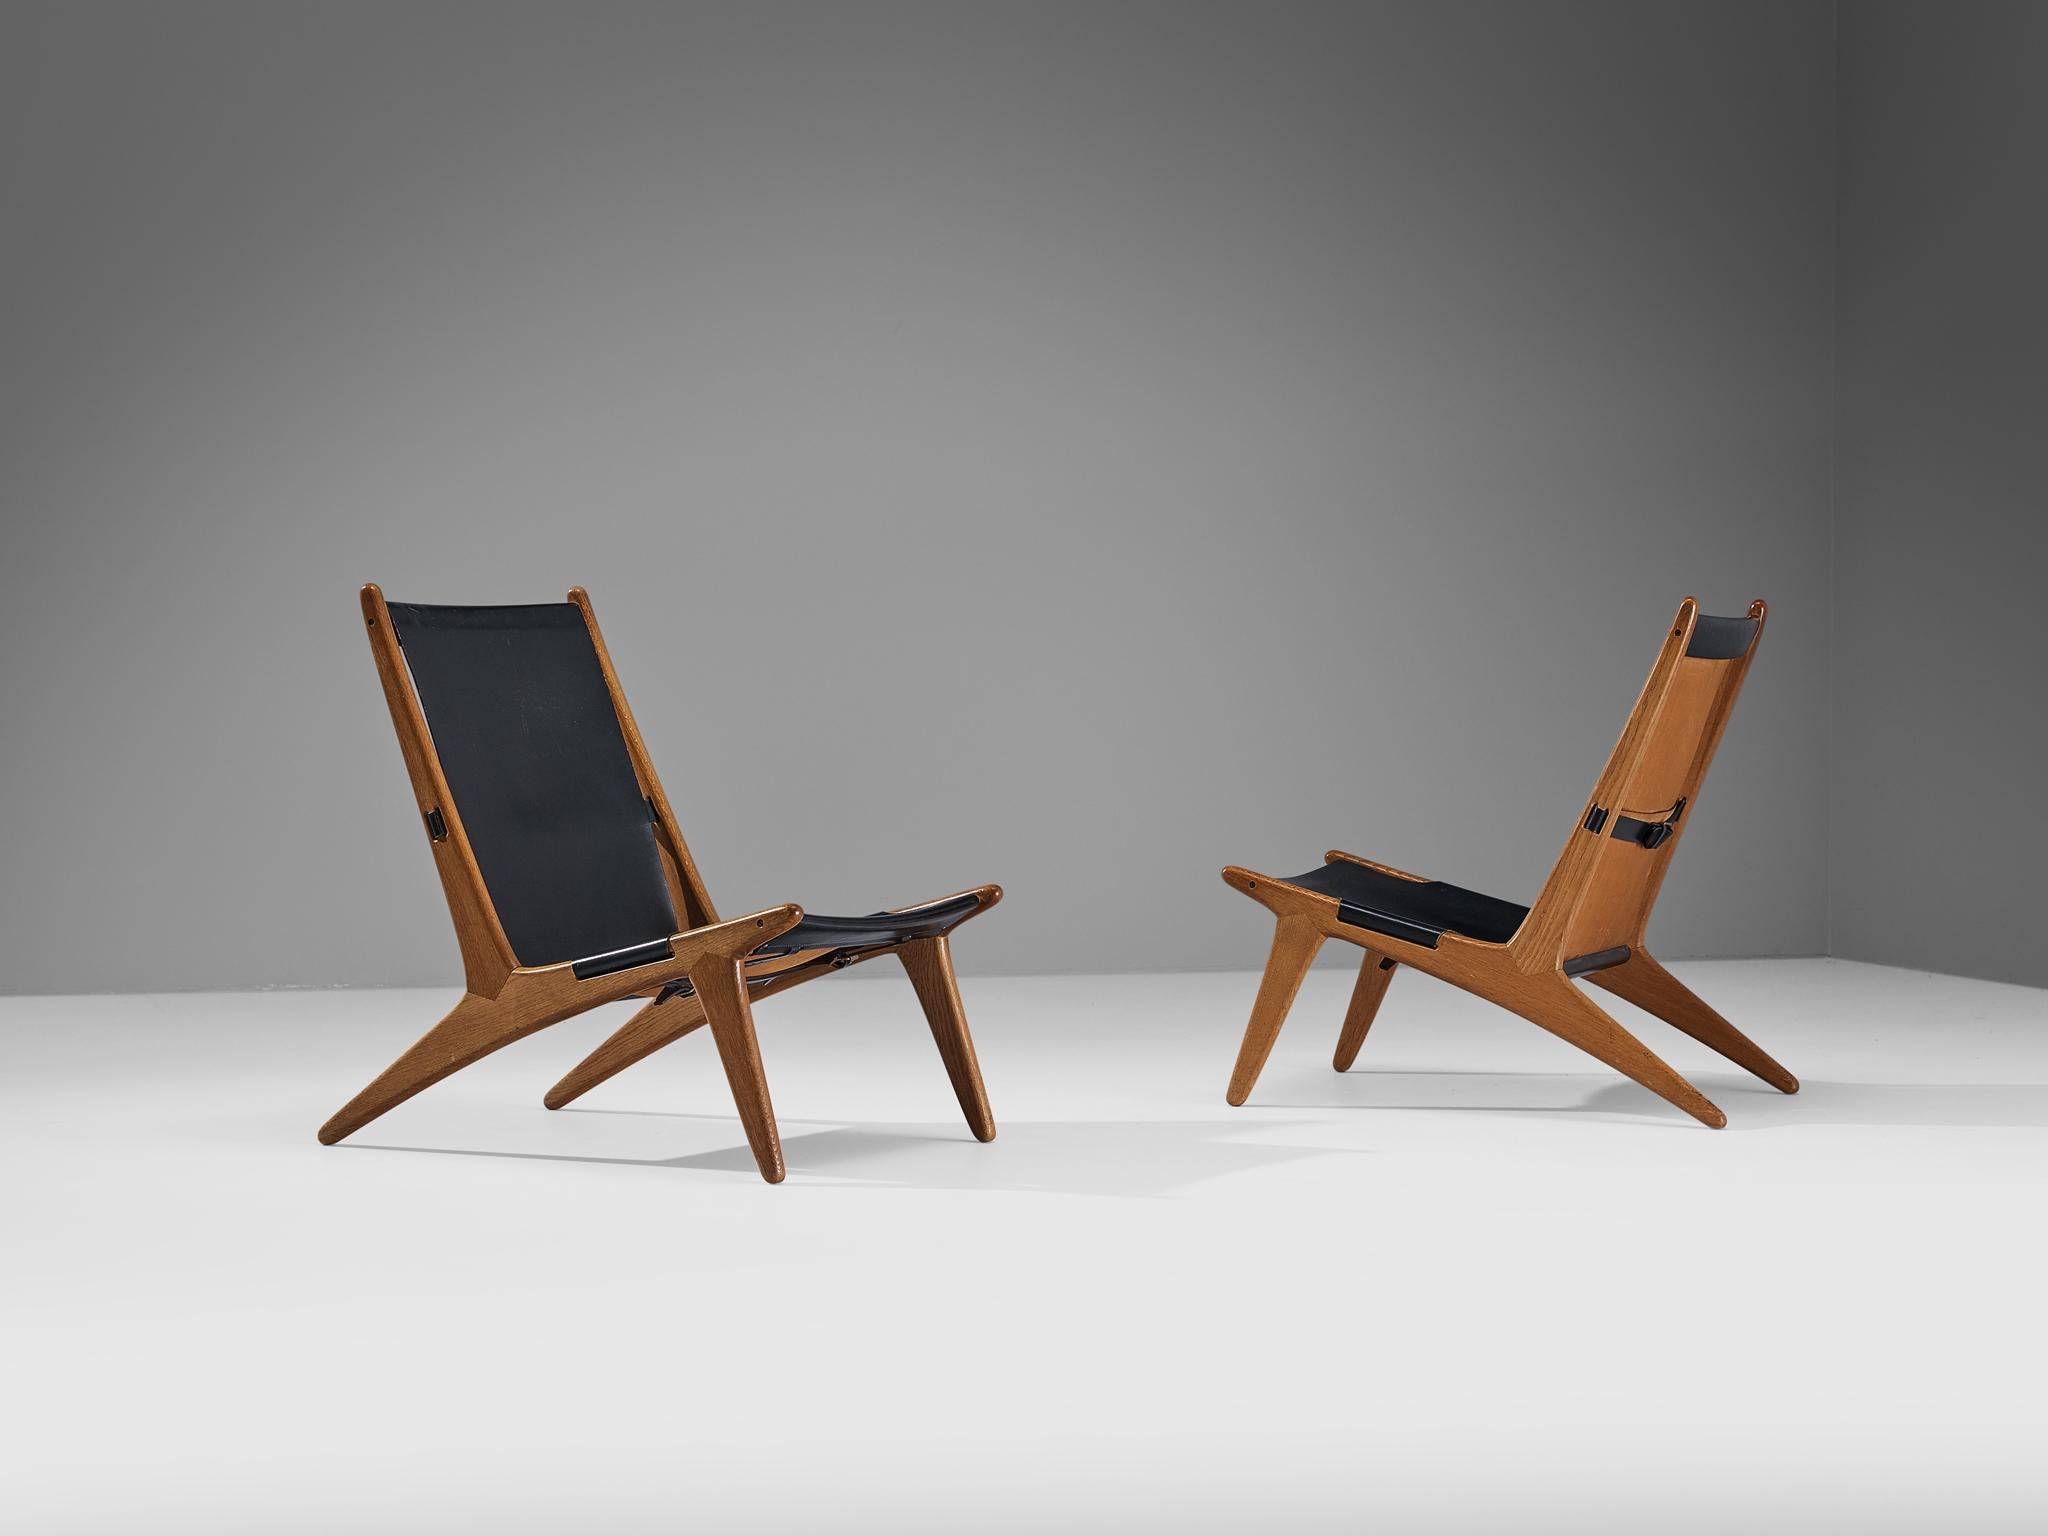 Uno & Östen Kristiansson for Luxus, pair of hunting chairs, model '204', leather, oak, Sweden, 1954

Swedish hunting chairs designed by Uno & Östen Kristiansson in the fifties. This unique design has a very strong appearance and easily catches the